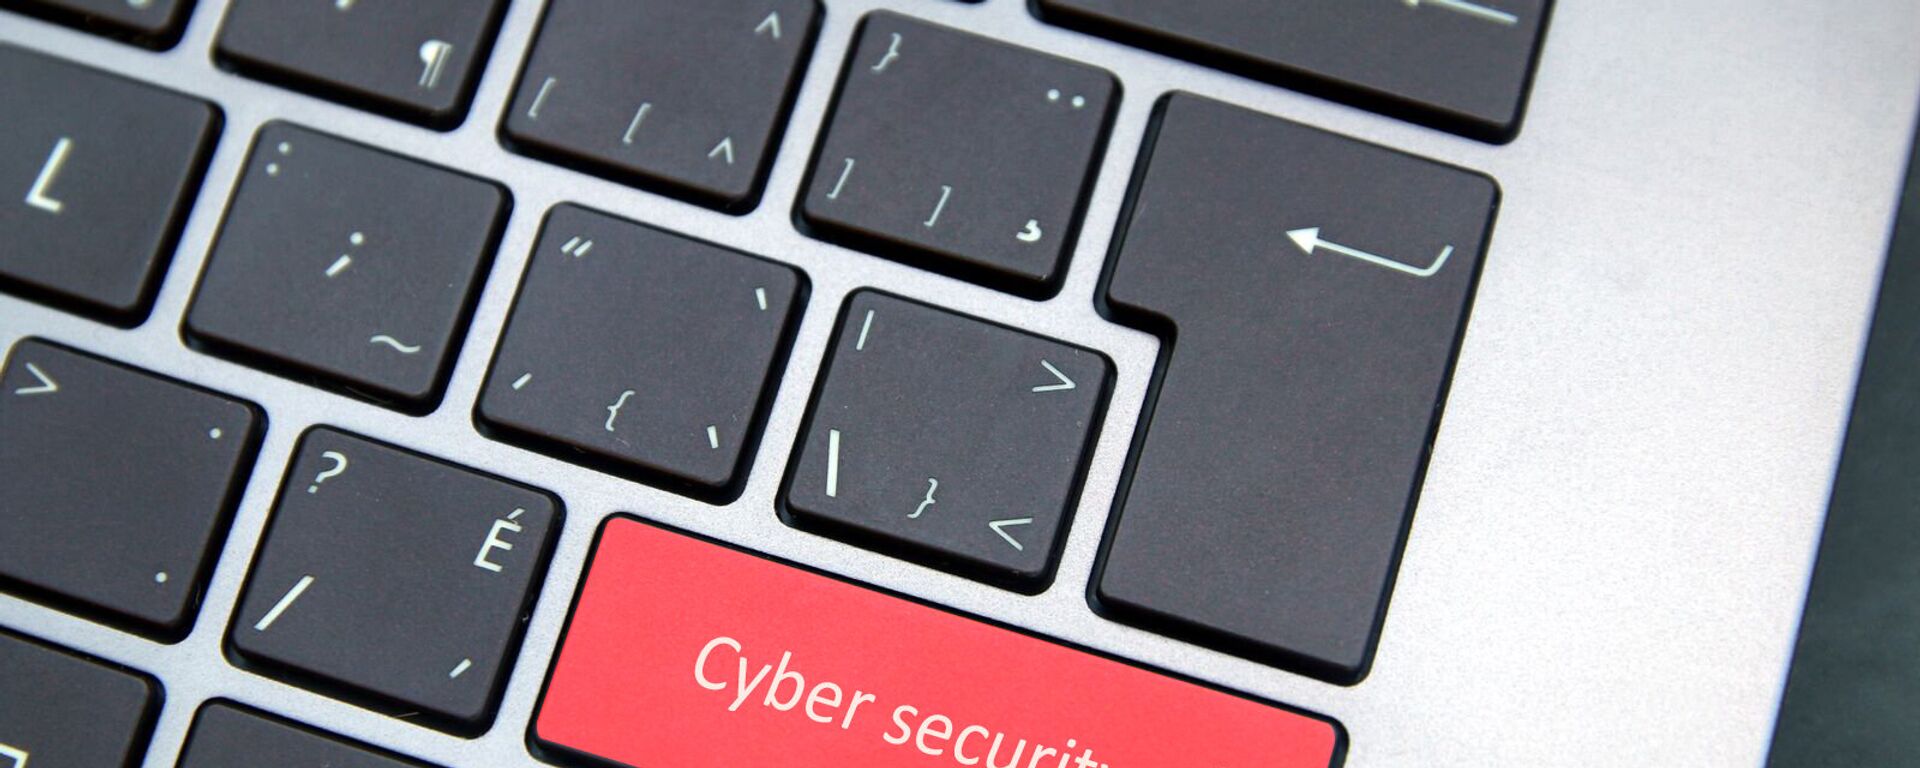 Computer keyboard with red cybersecurity button - Sputnik International, 1920, 16.07.2021